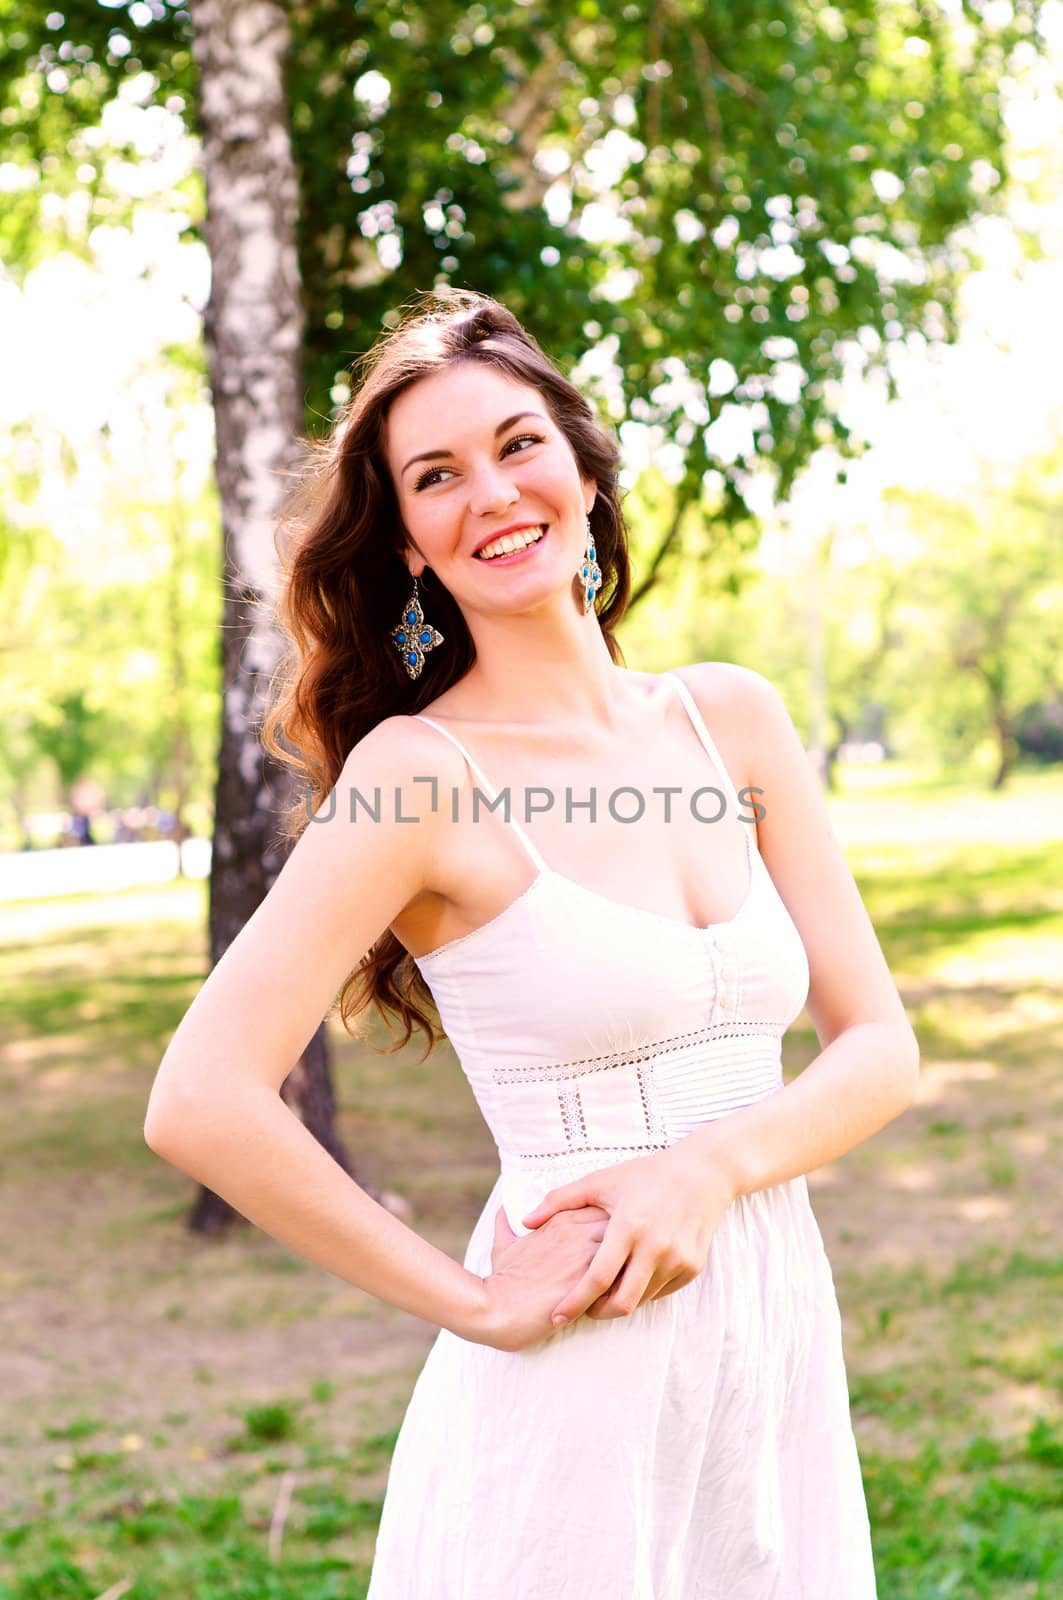 Portrait of an attractive woman in the park, smile and happy